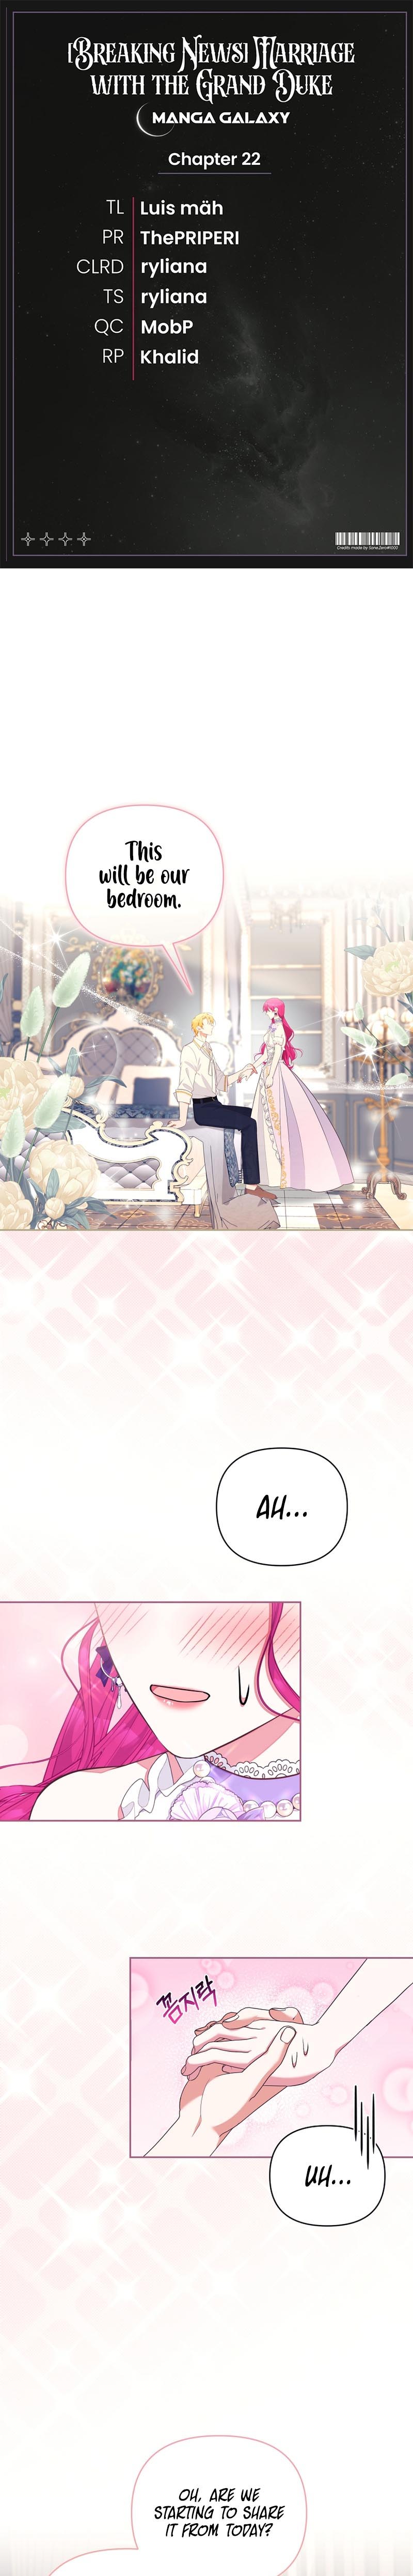 [Breaking News] Marriage With The Grand Duke Chapter 22